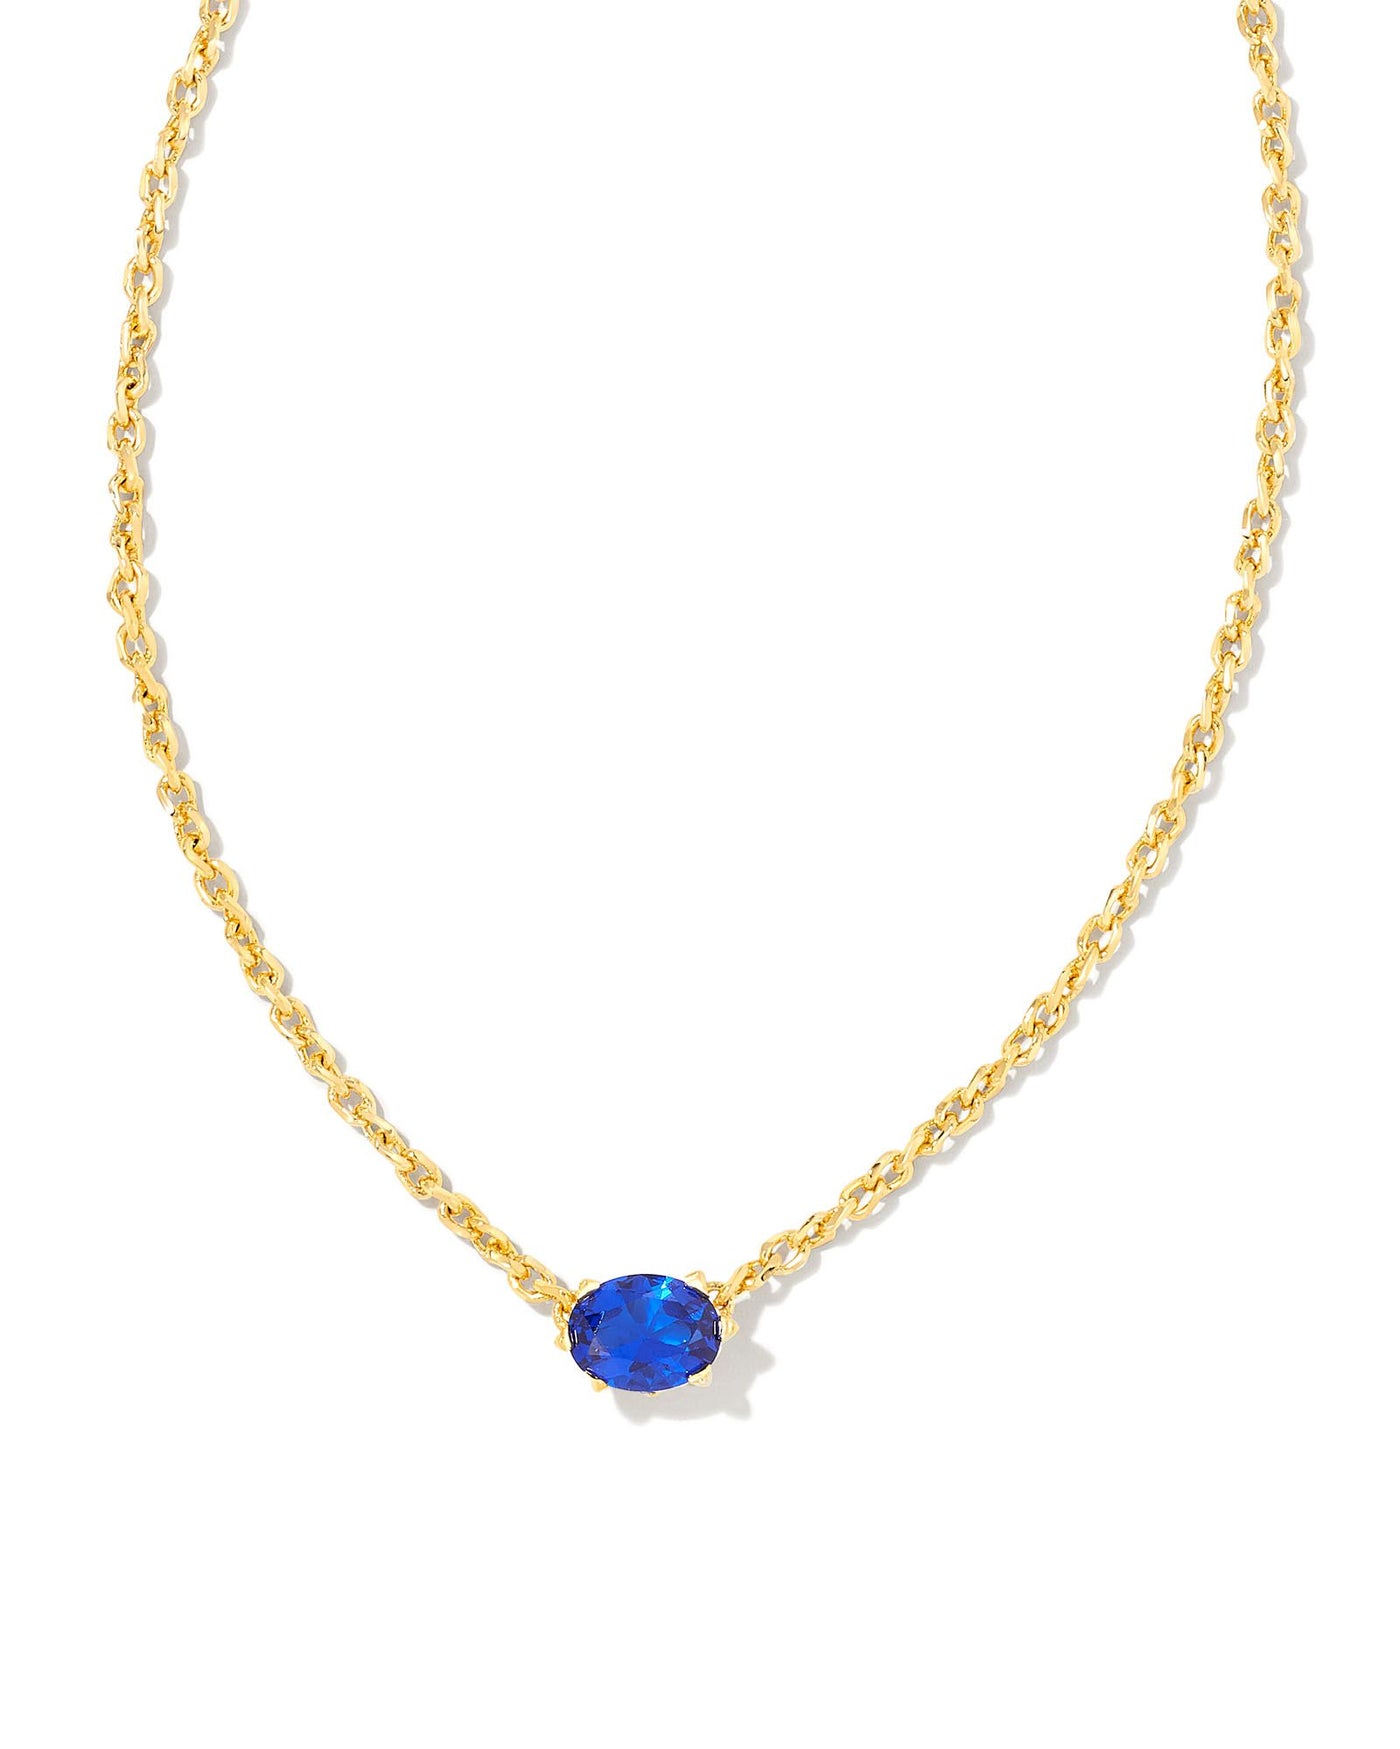 Cailin Crystal Pendant Necklace Gold Blue Crystal on white background, front view.